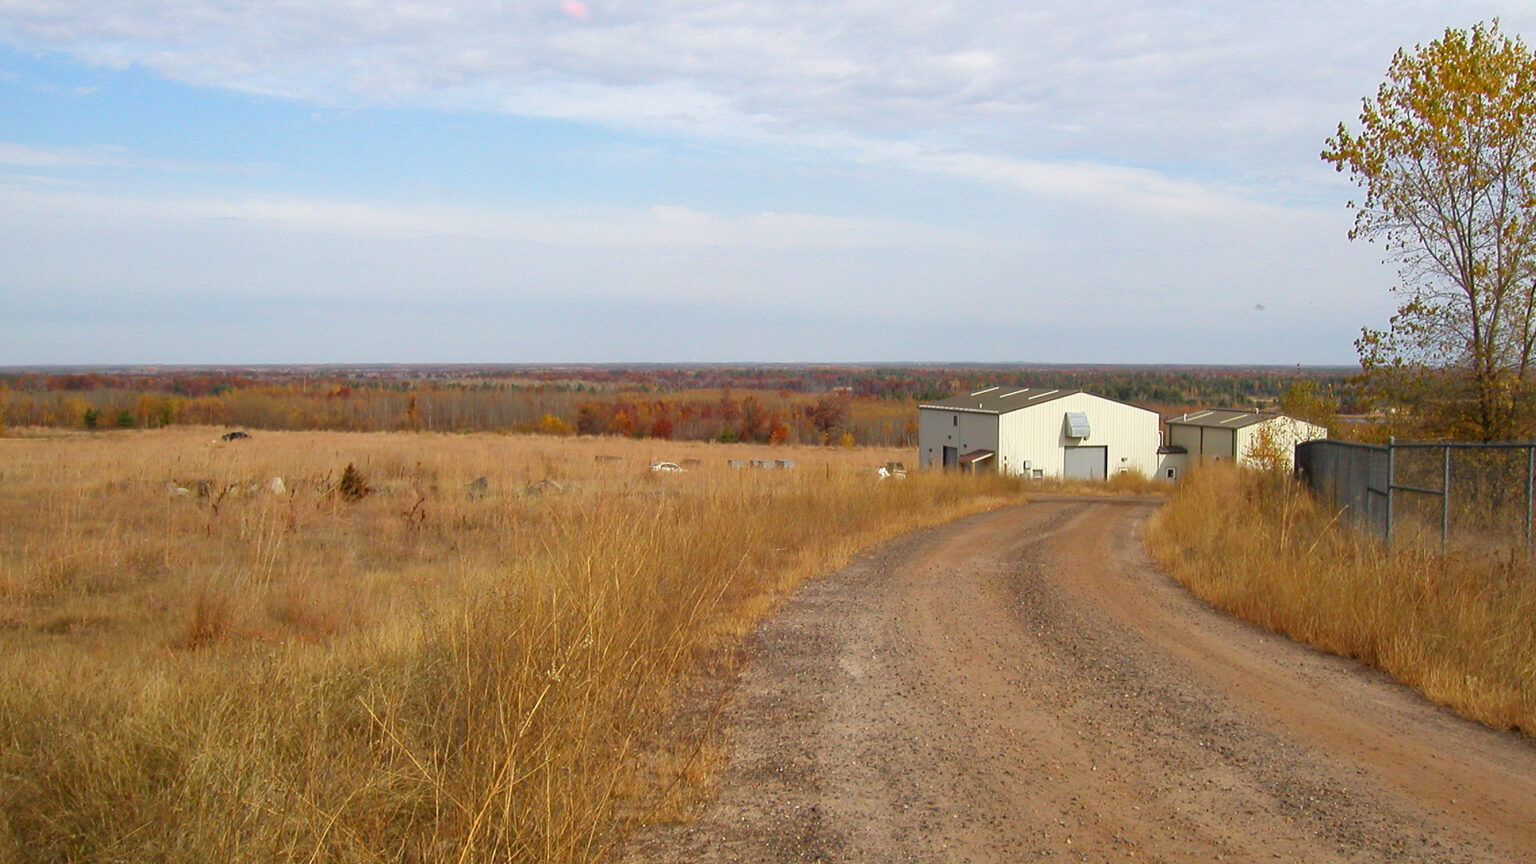 Two small warehouse buildings stand at the end of a gravel road, with a field in the foreground and trees with autumn leaves in the background extending to a distant horizon.